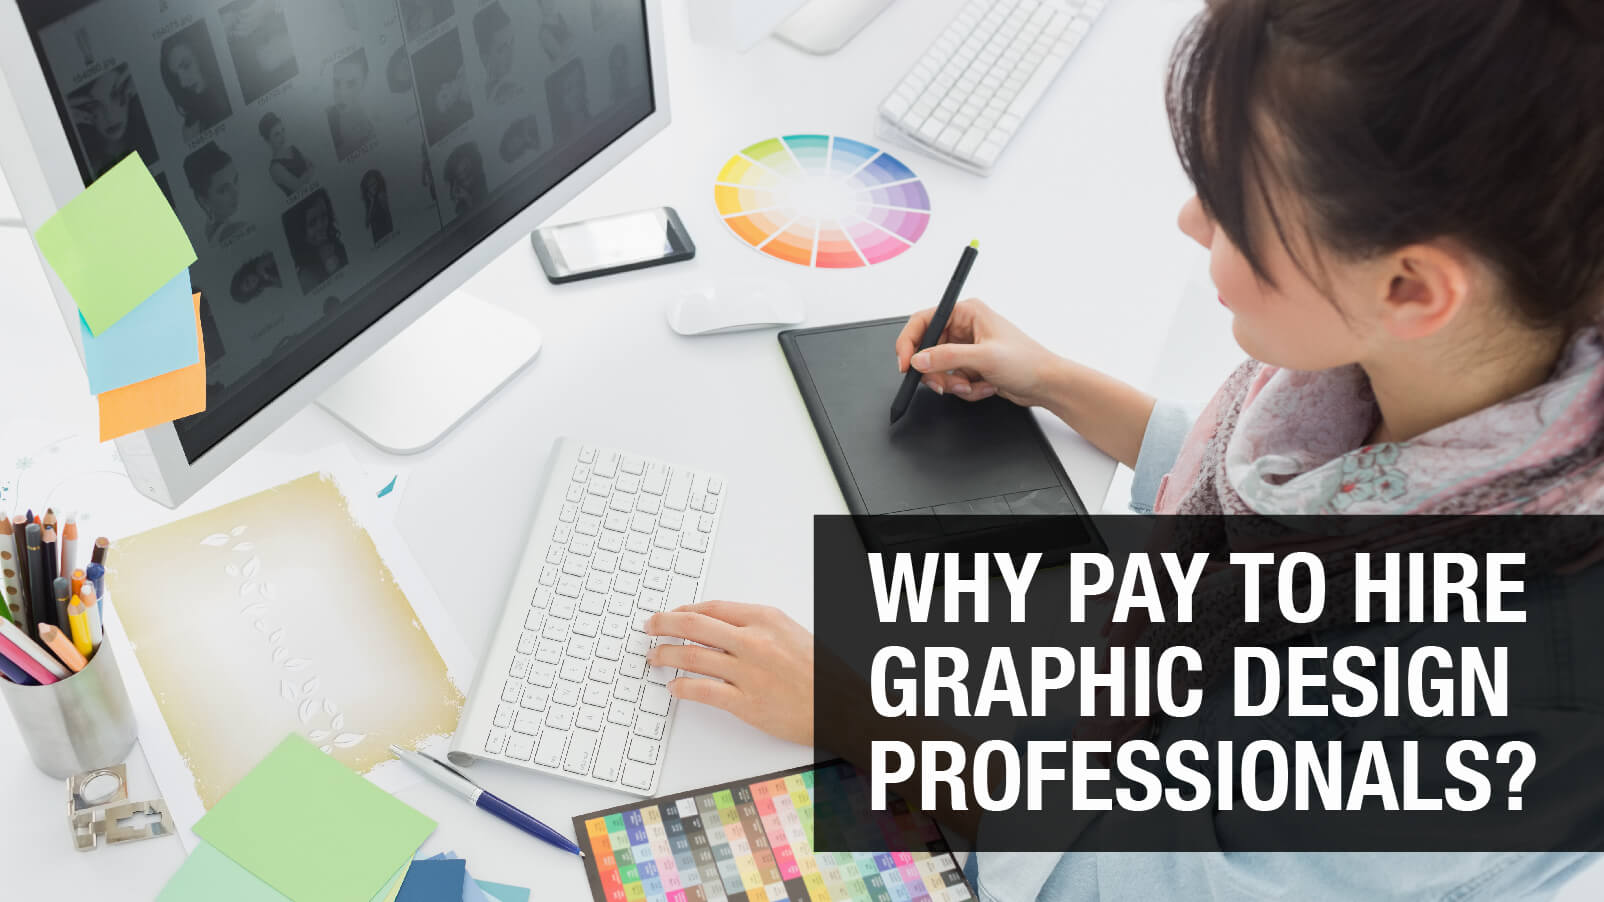 Why Pay to Hire Graphic Design Professionals?